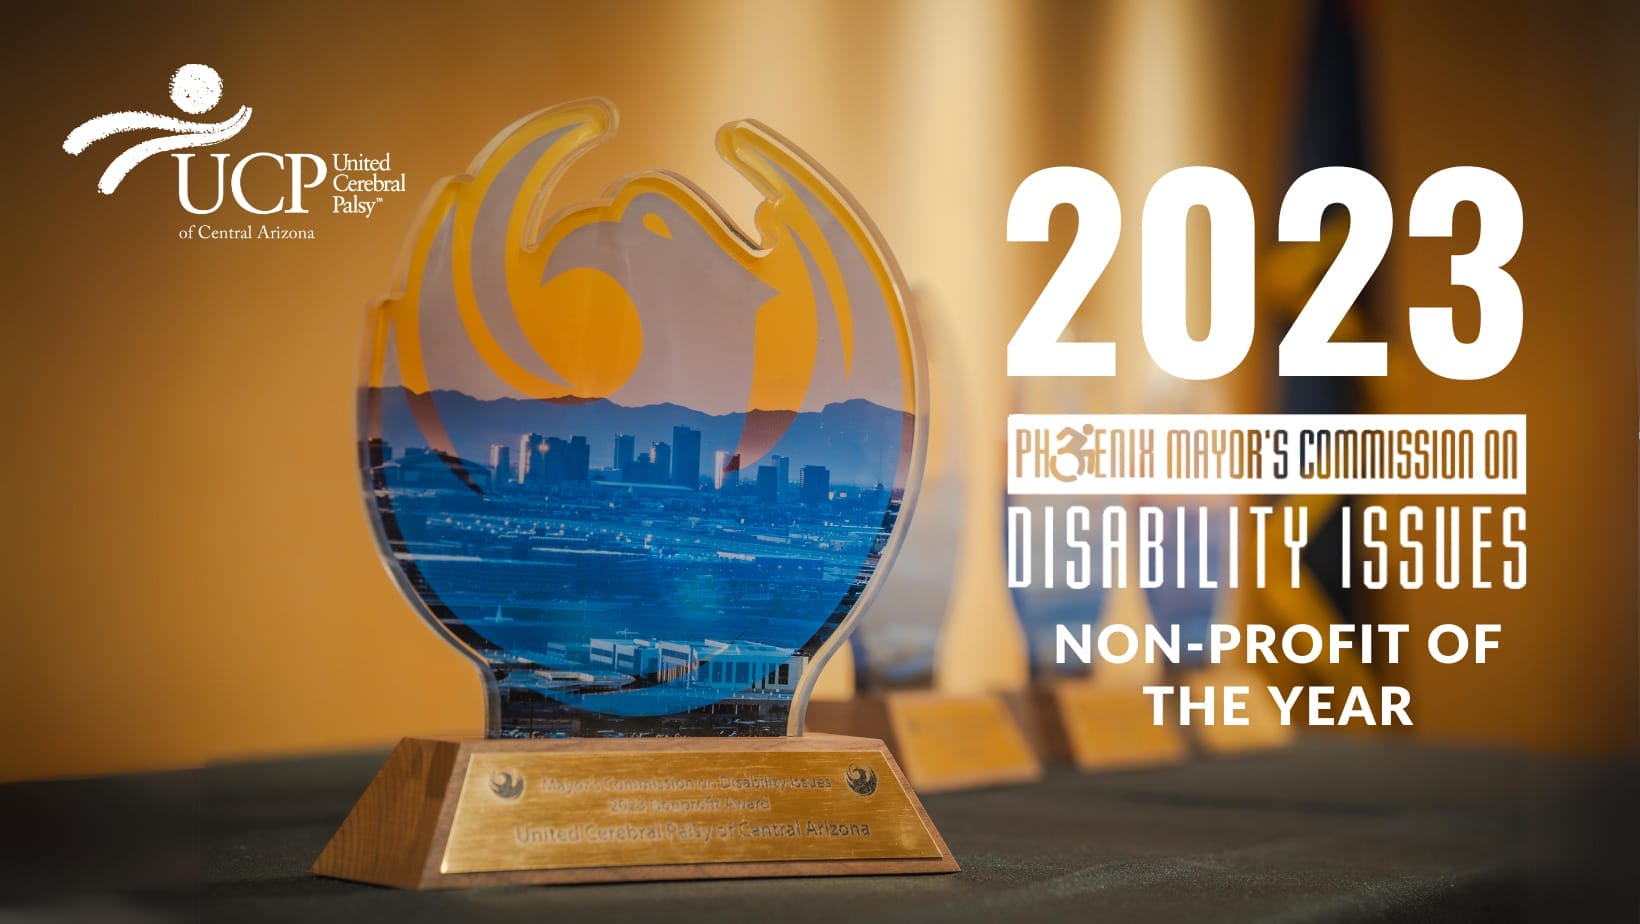 UCP Wins 2023 Nonprofit of the Year Award for Disability Issues.